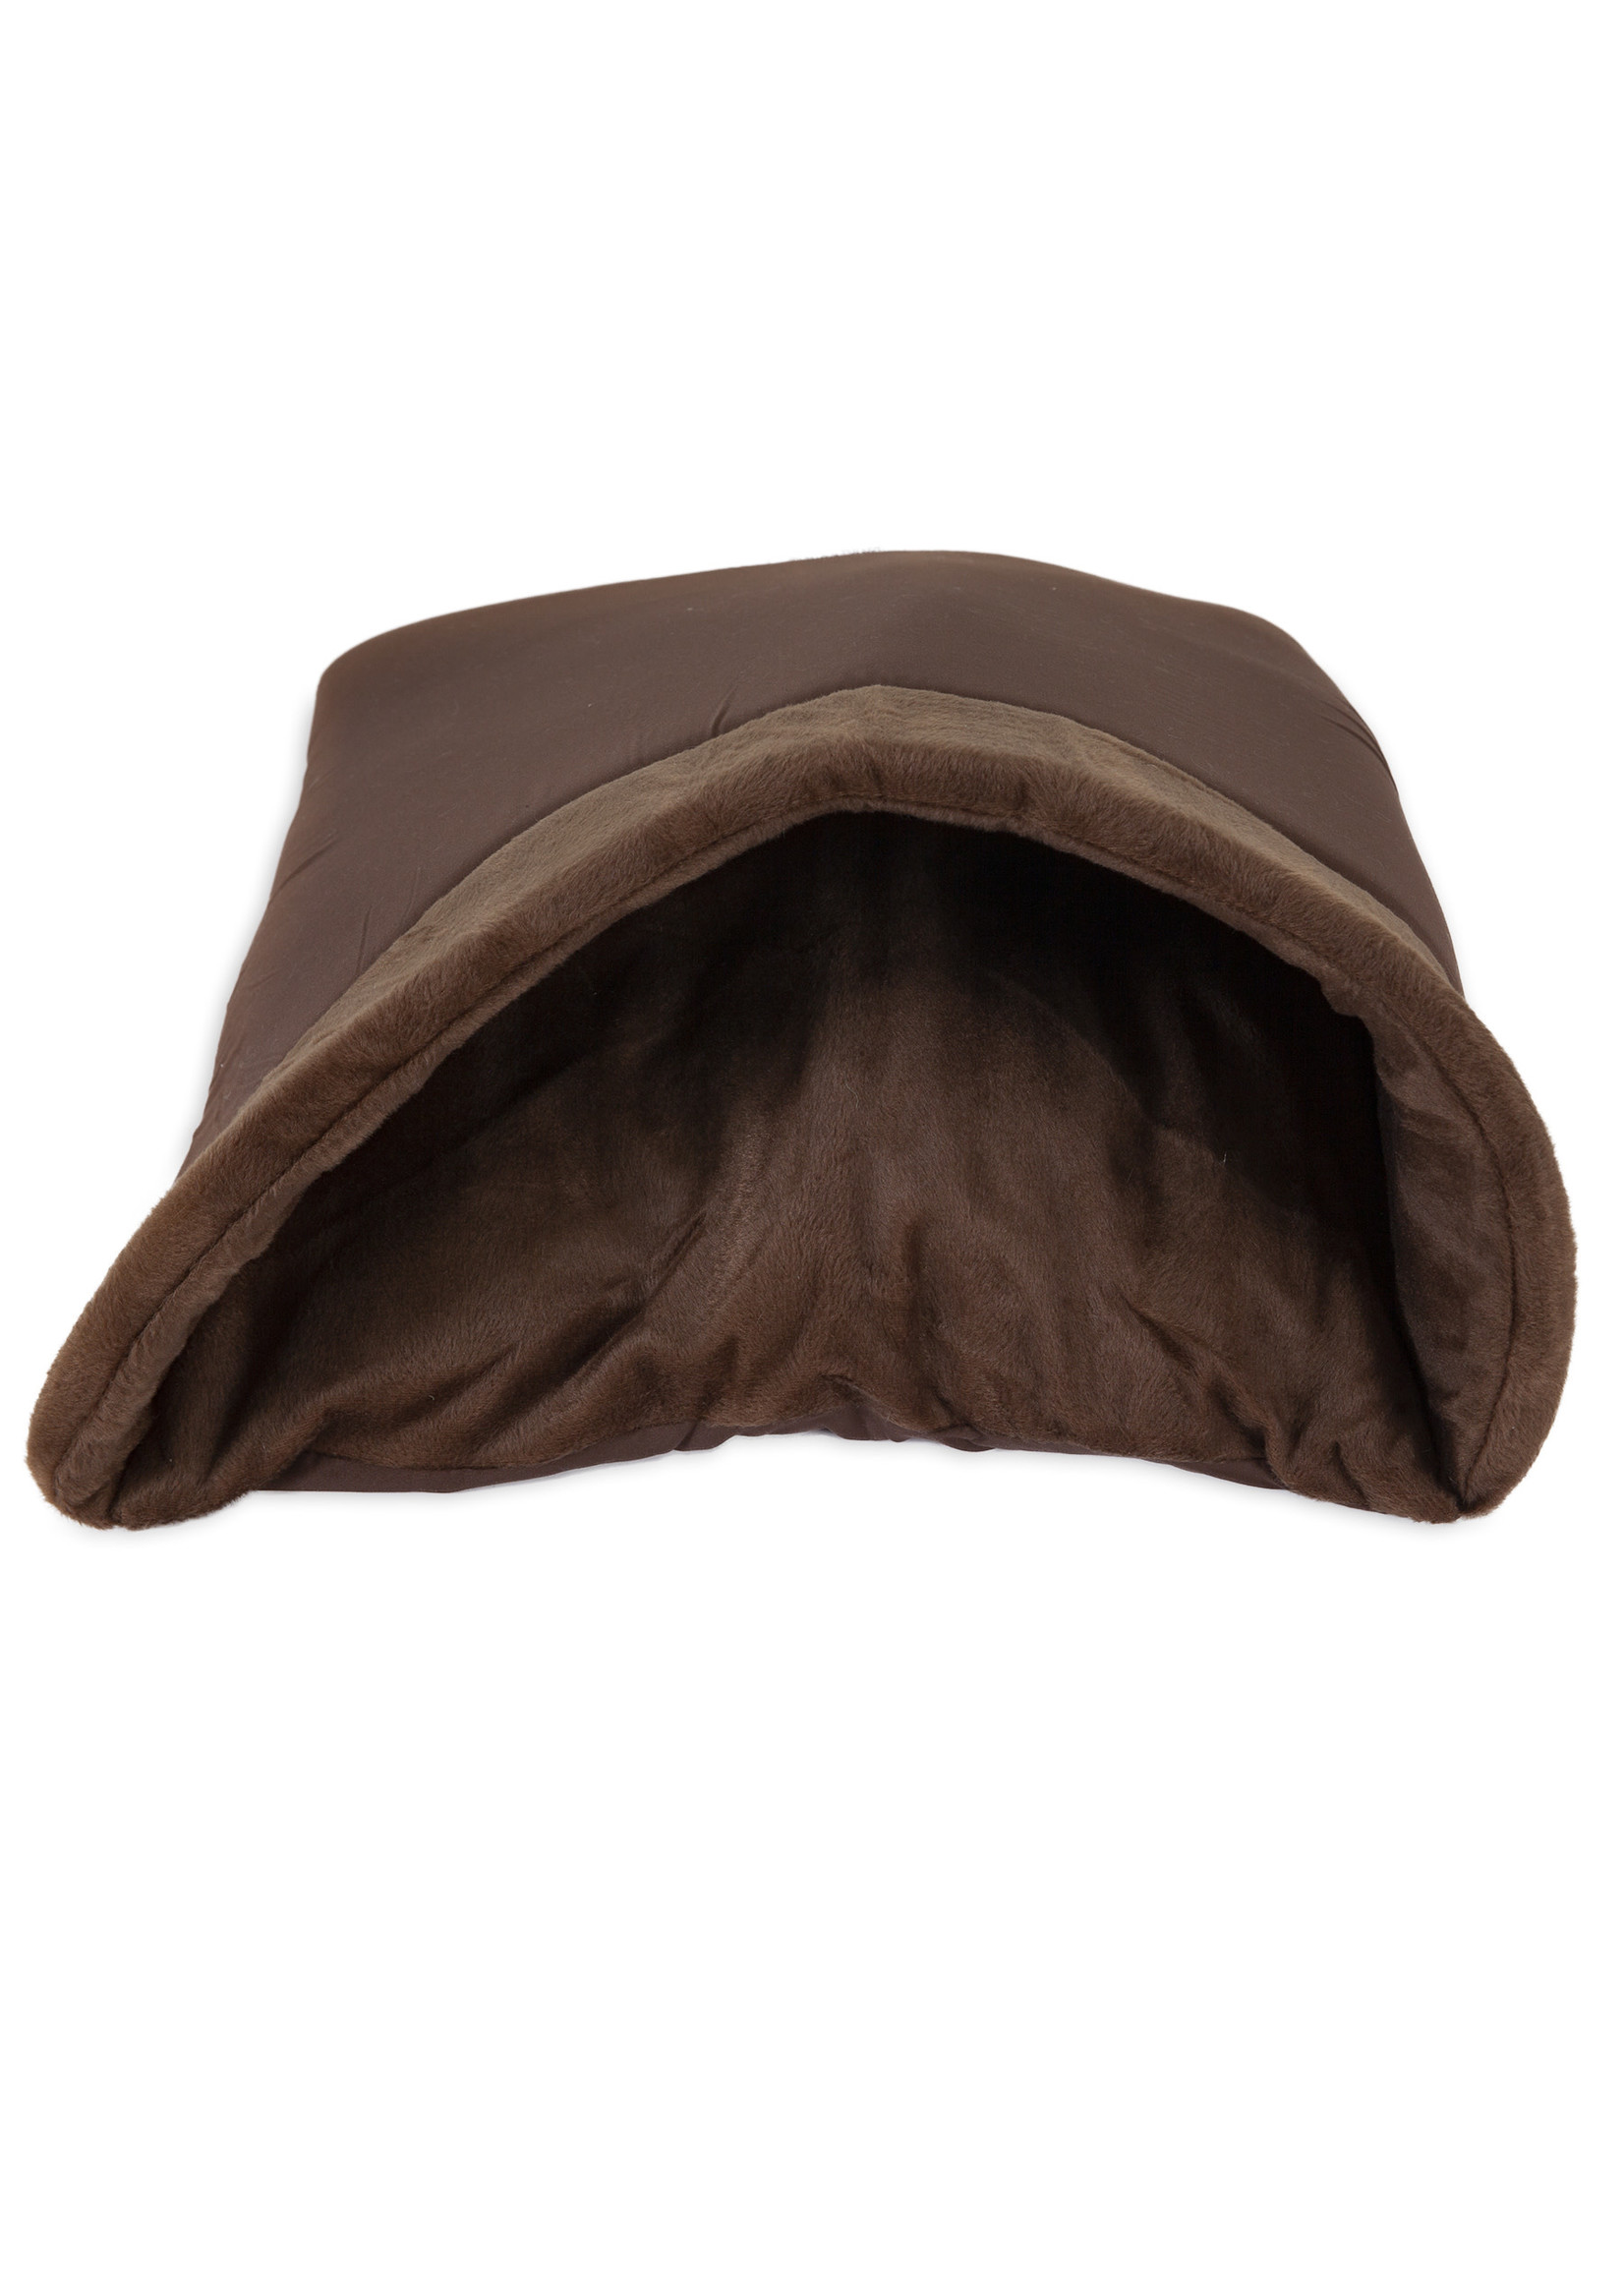 Petmate Petmate Bed Kitty Cave Brown 19x16